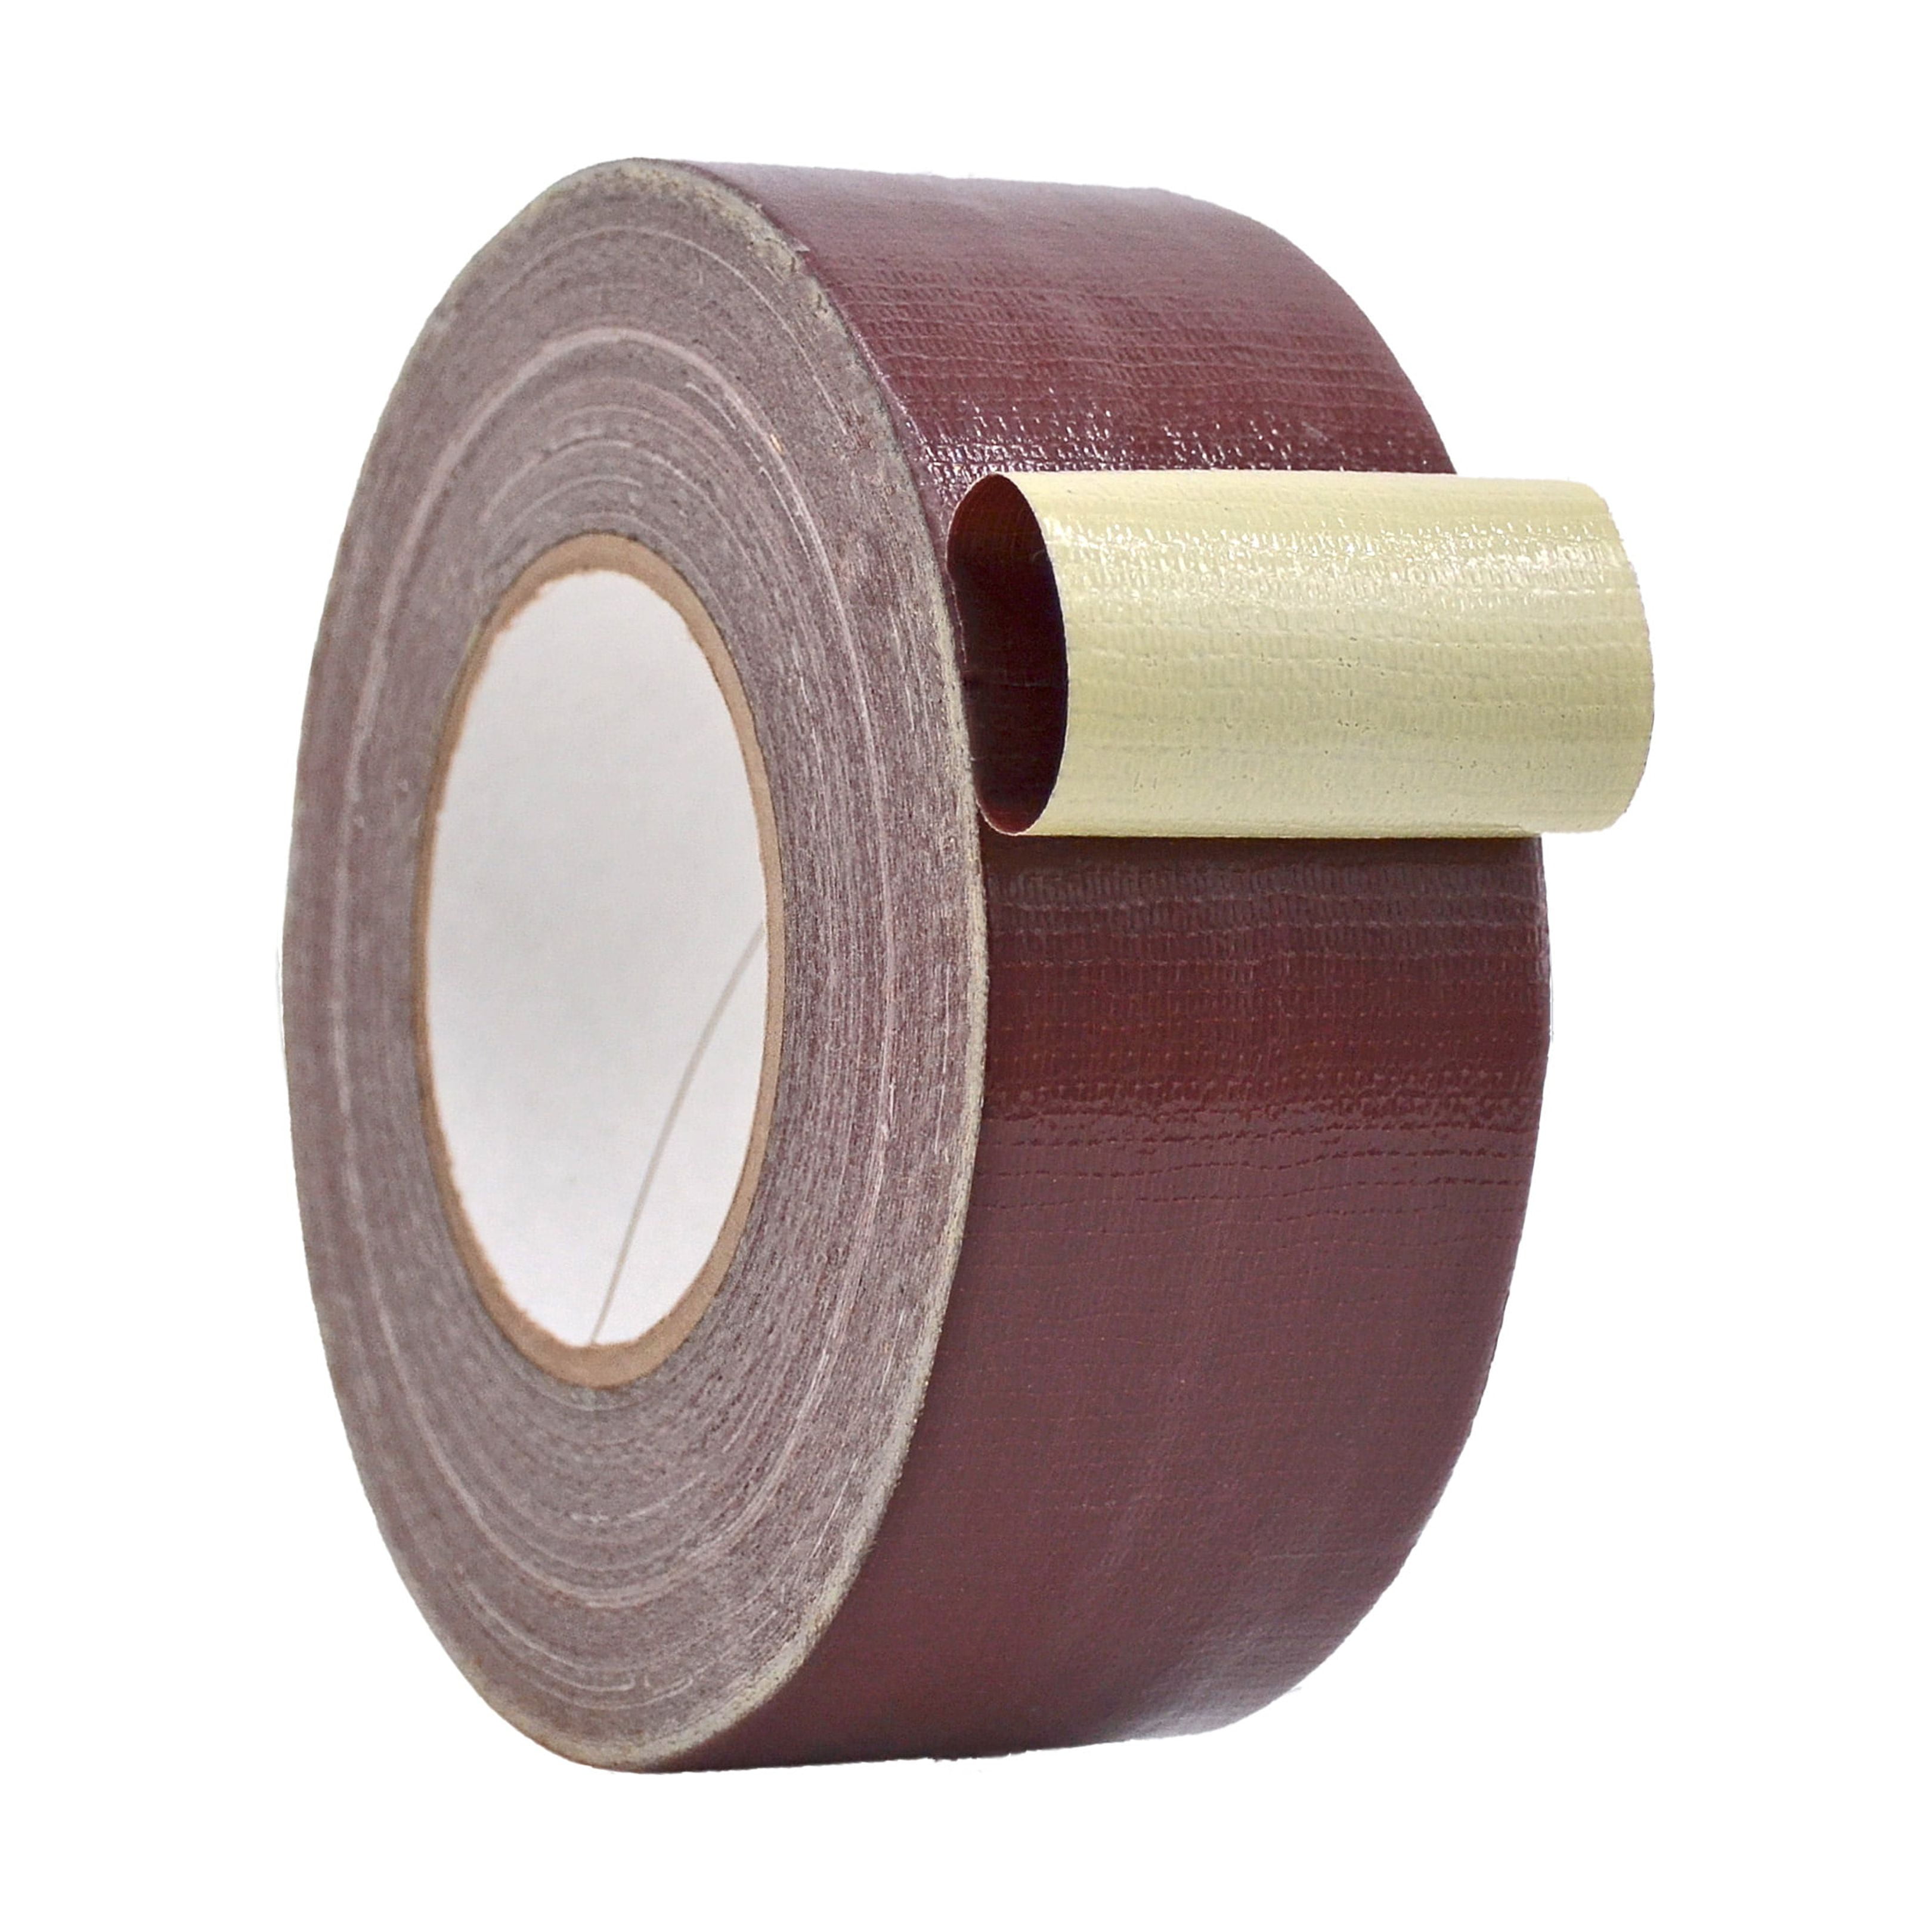 WOD Tape Pink Duct Tape 4.72 in x 60 yd. Strong Waterproof DTC10